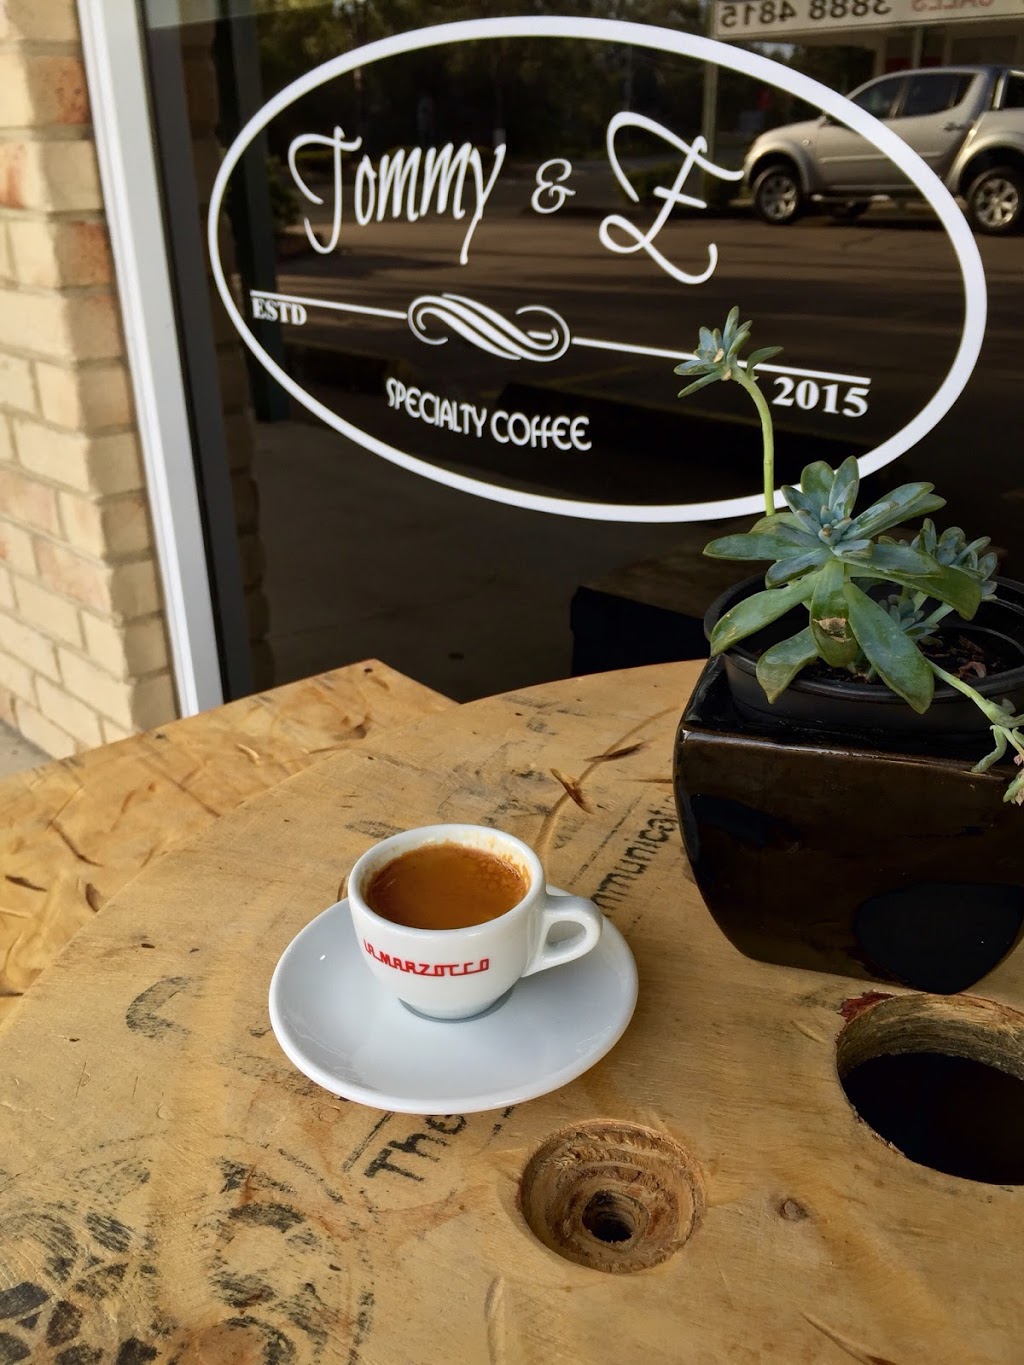 Tommy & E Specialty Coffee | cafe | 33-35 Progress Rd, Burpengary QLD 4505, Australia | 0431242510 OR +61 431 242 510